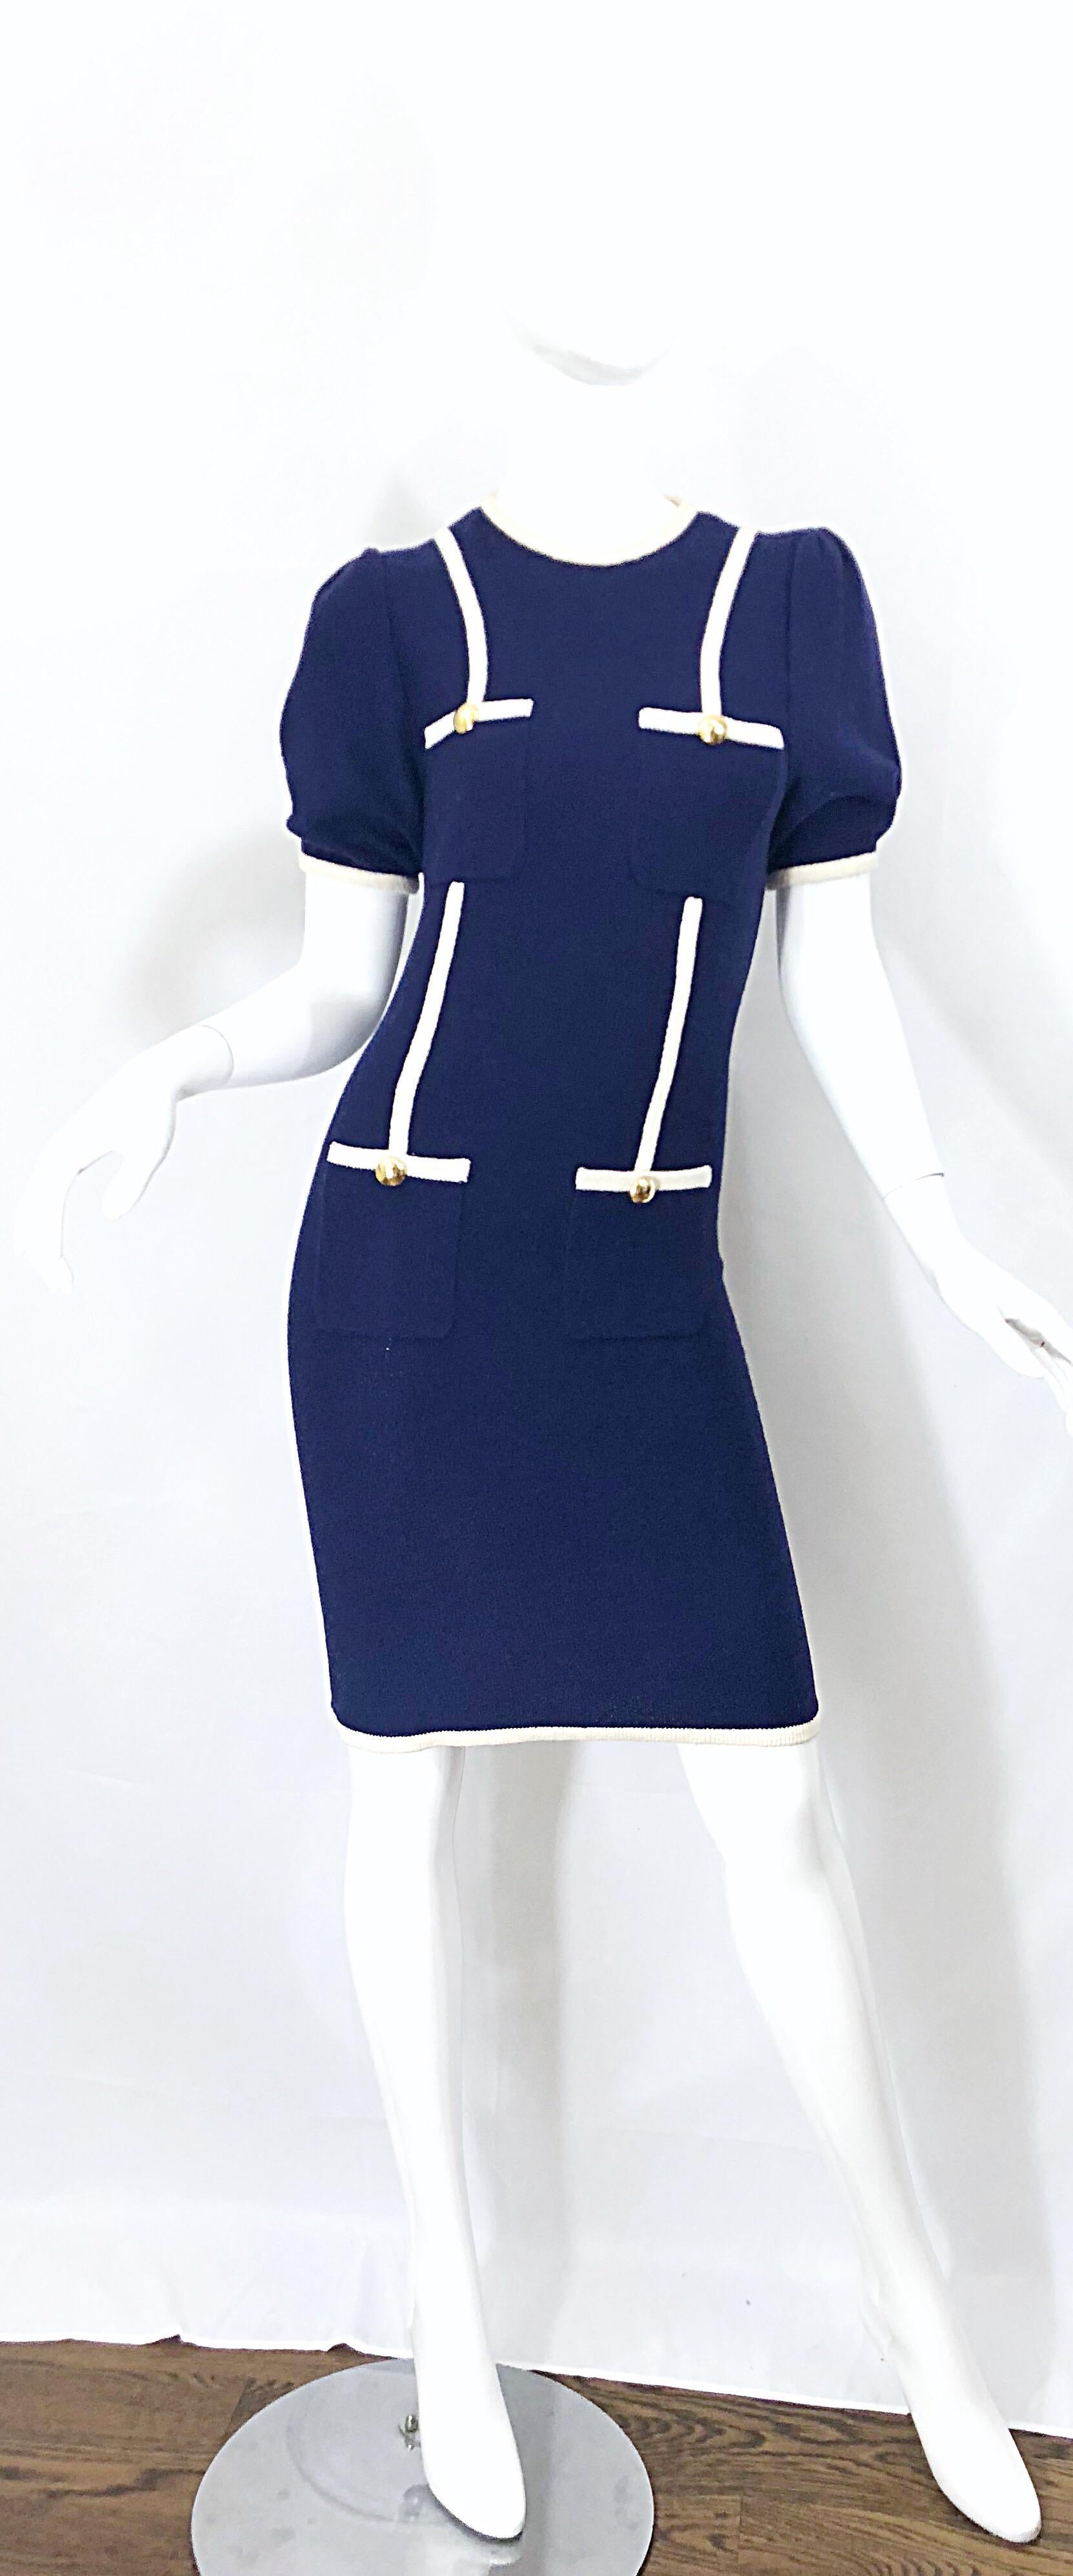 Chic vintage ADOLFO for SAKS FIFTH AVE. navy blue and white nautical knit dress! Soft knit fabric stretches to fit. Four pockets on the front with shiny gold buttons. Hidden zipper up the back with hook-and-eye closure. Very well made, with lots of